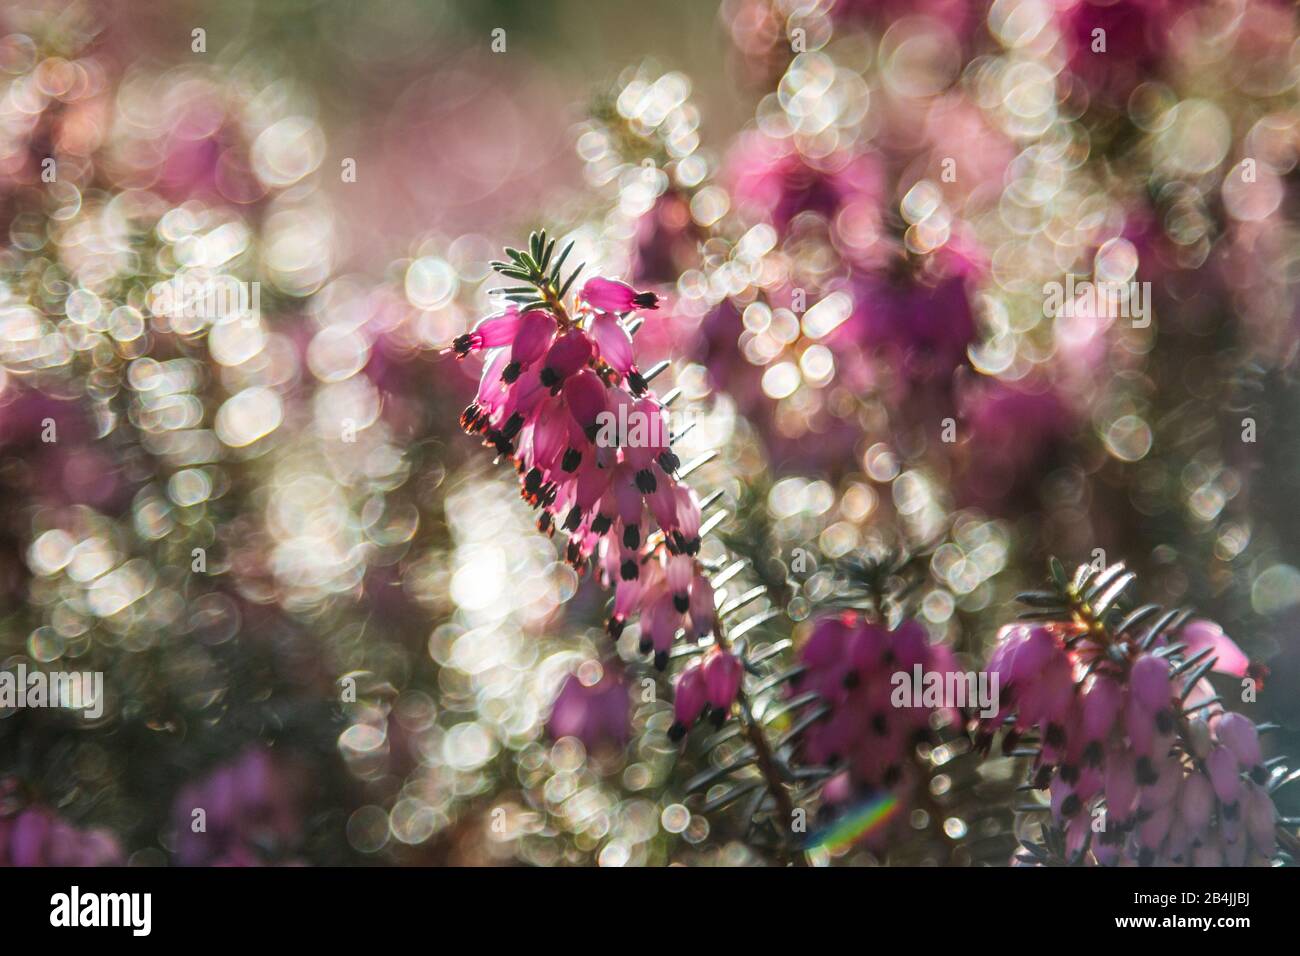 Pink flowering heather, close-up Stock Photo